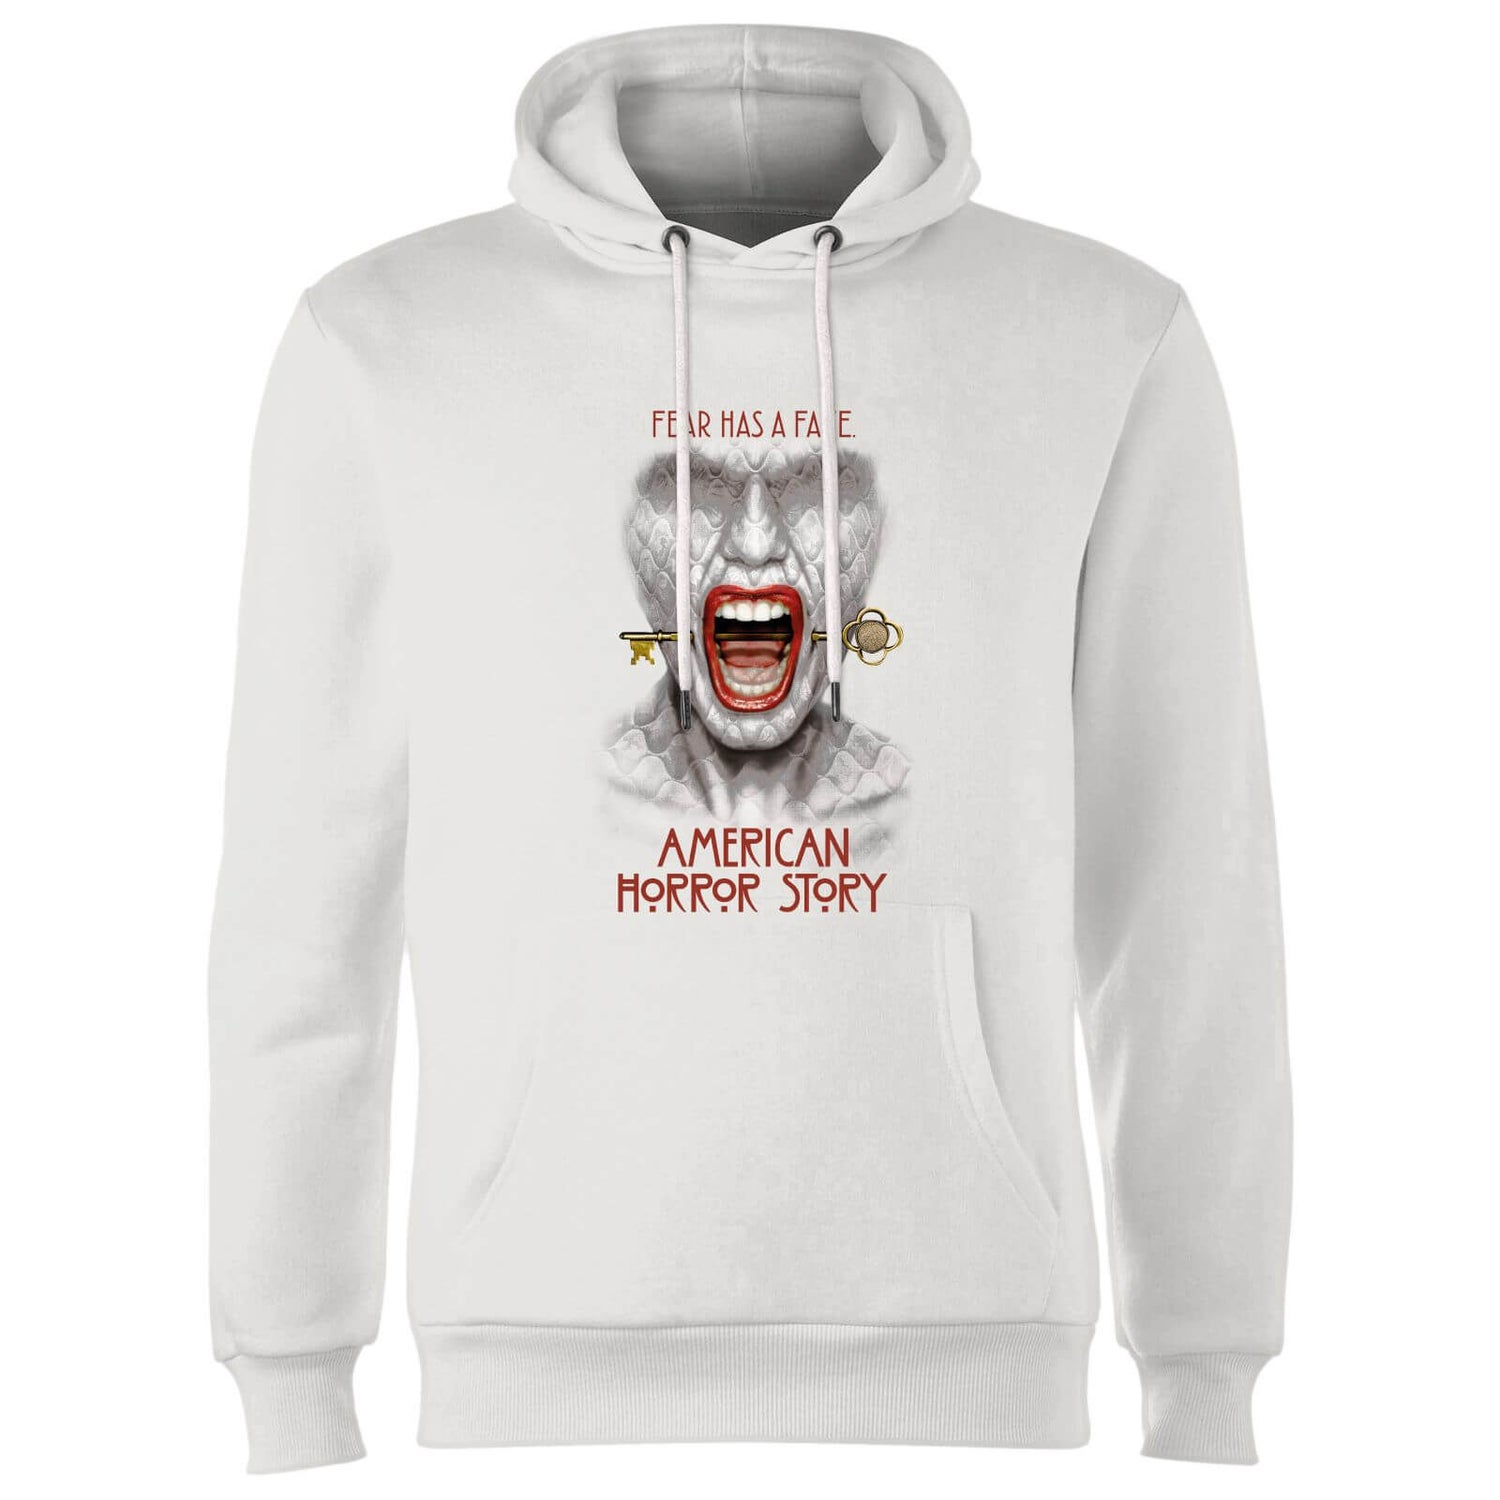 American Horror Story Fear Has A Face Hoodie - White